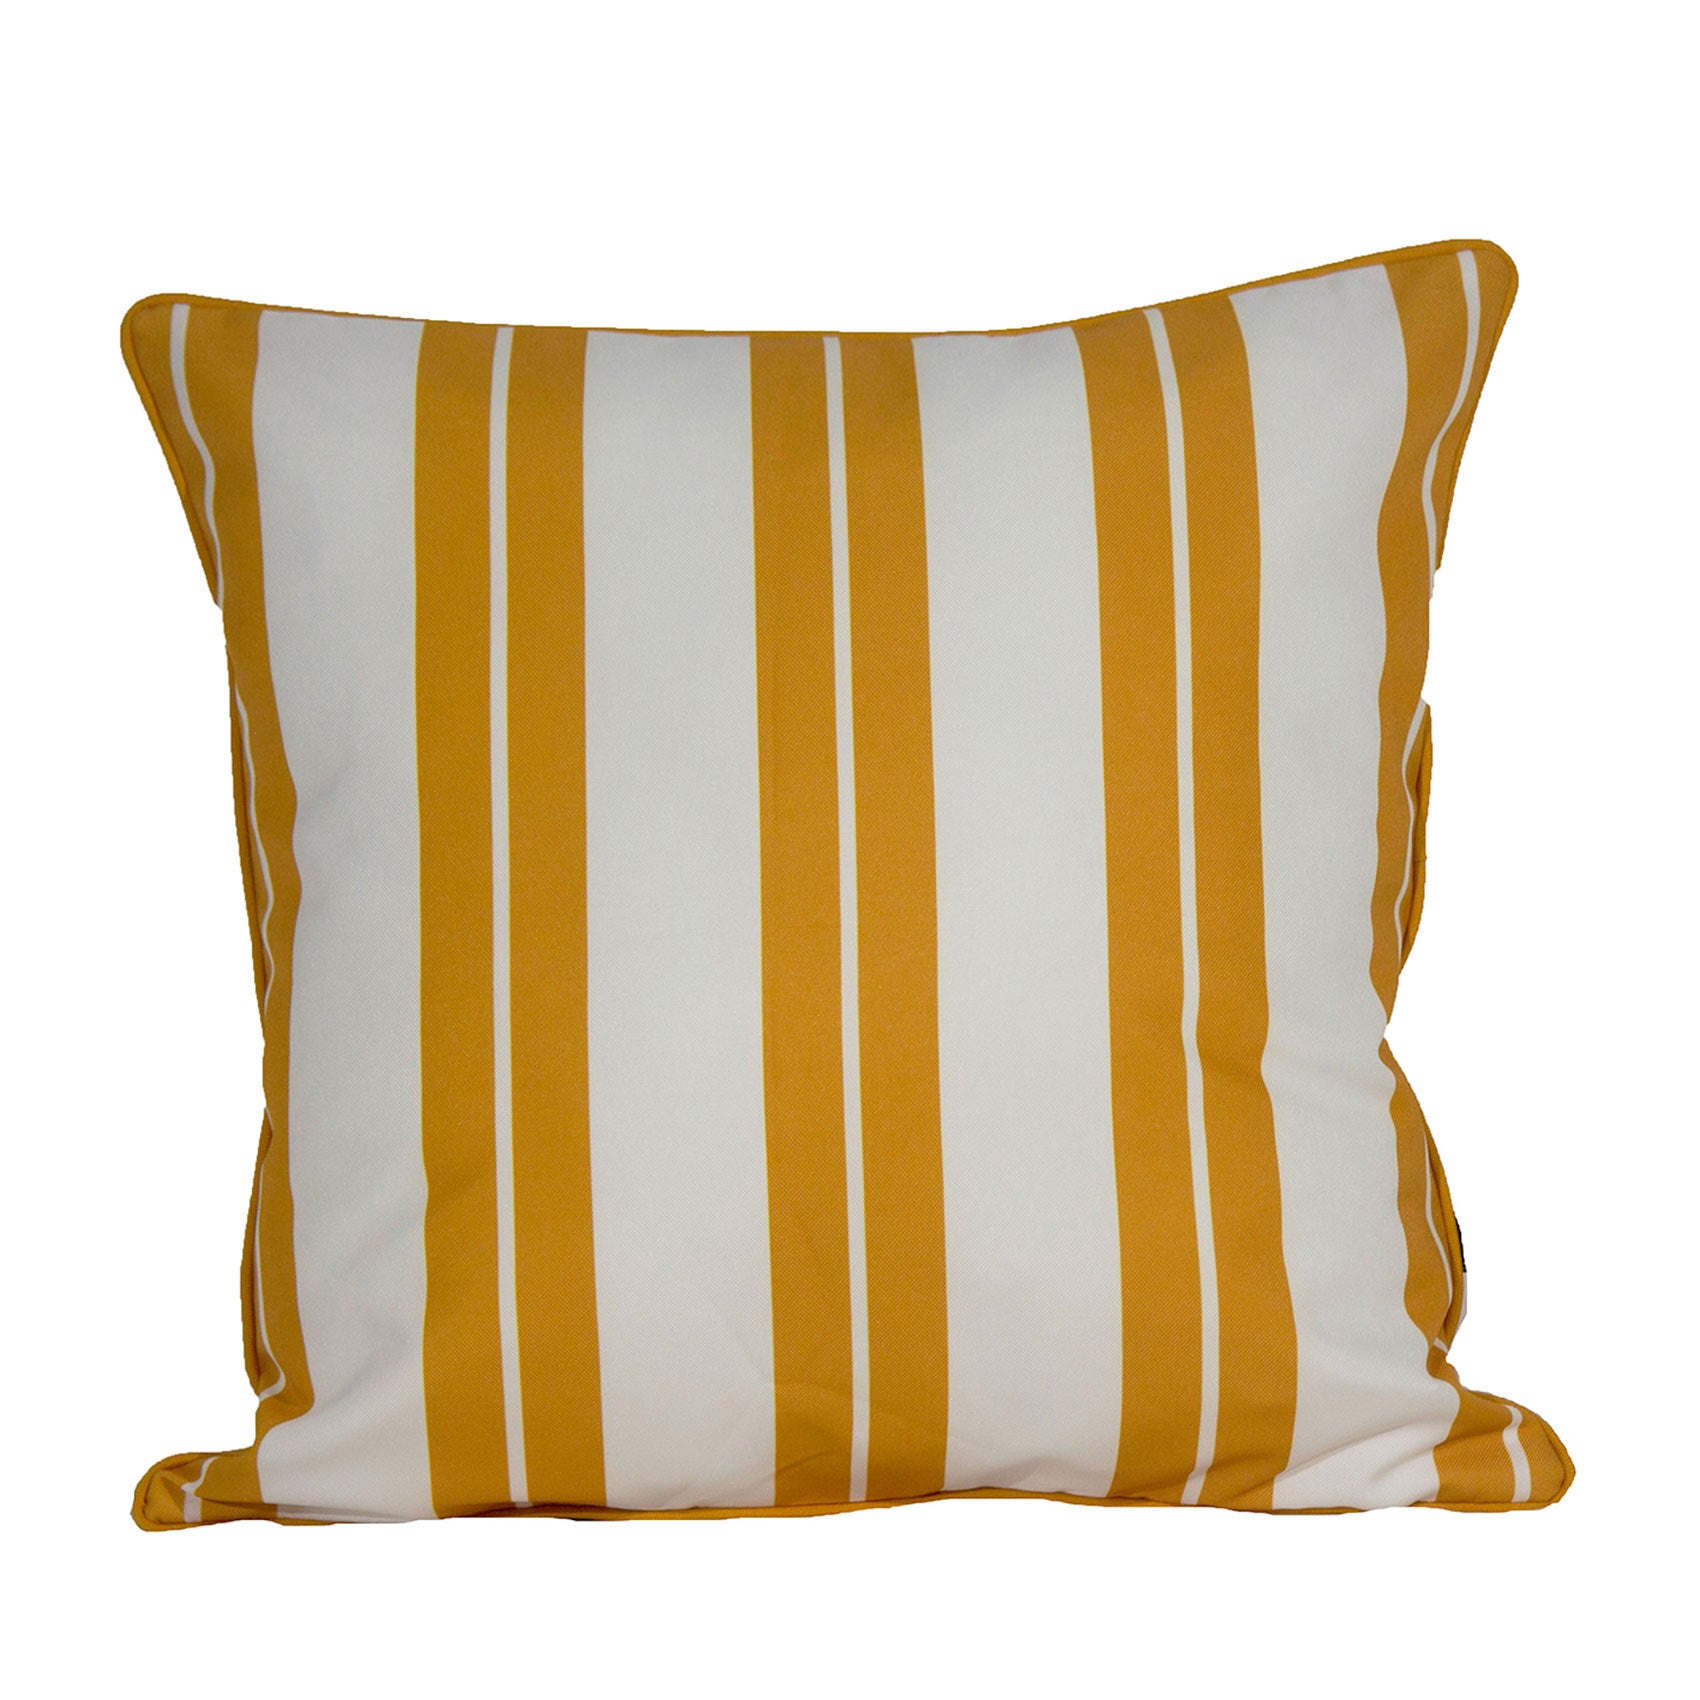 Coussin outdoor à rayures - Jaune tournesol - 45x45 cm - Polyester